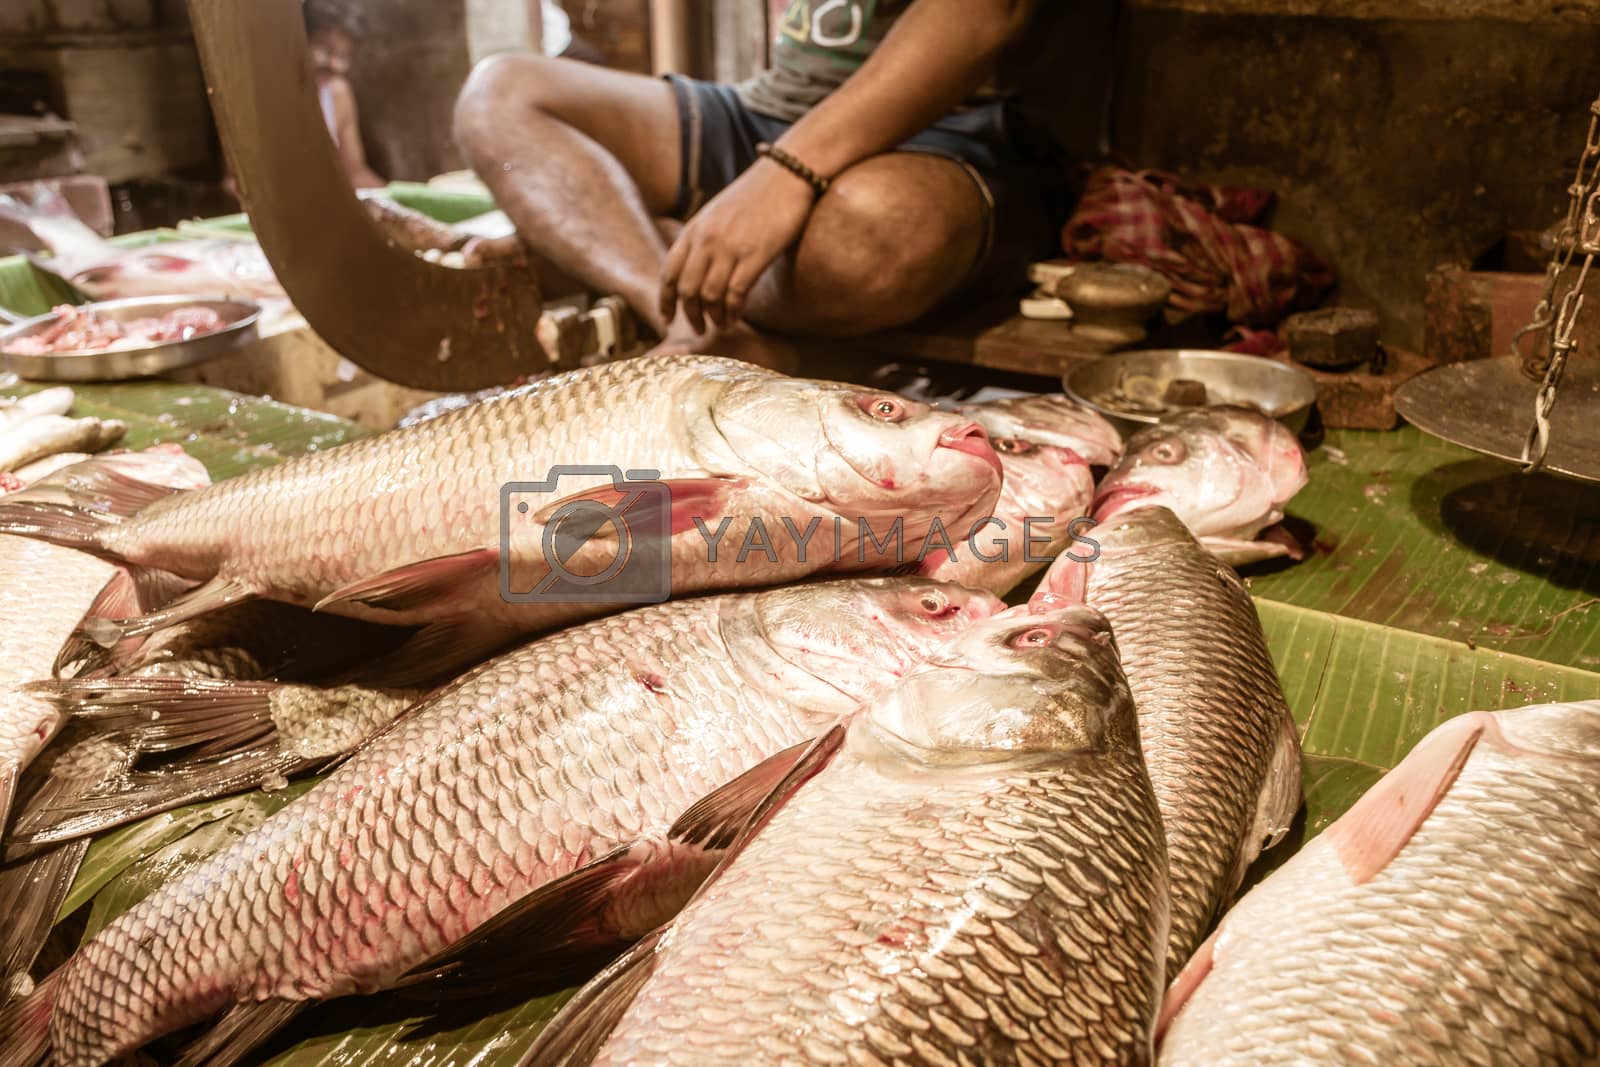 Royalty free image of Popular Rohu, Rui, Roho Labeo fish display for sell in a Street food stall in a roadside local bazaar market. Kolkata West Bengal, India by sudiptabhowmick